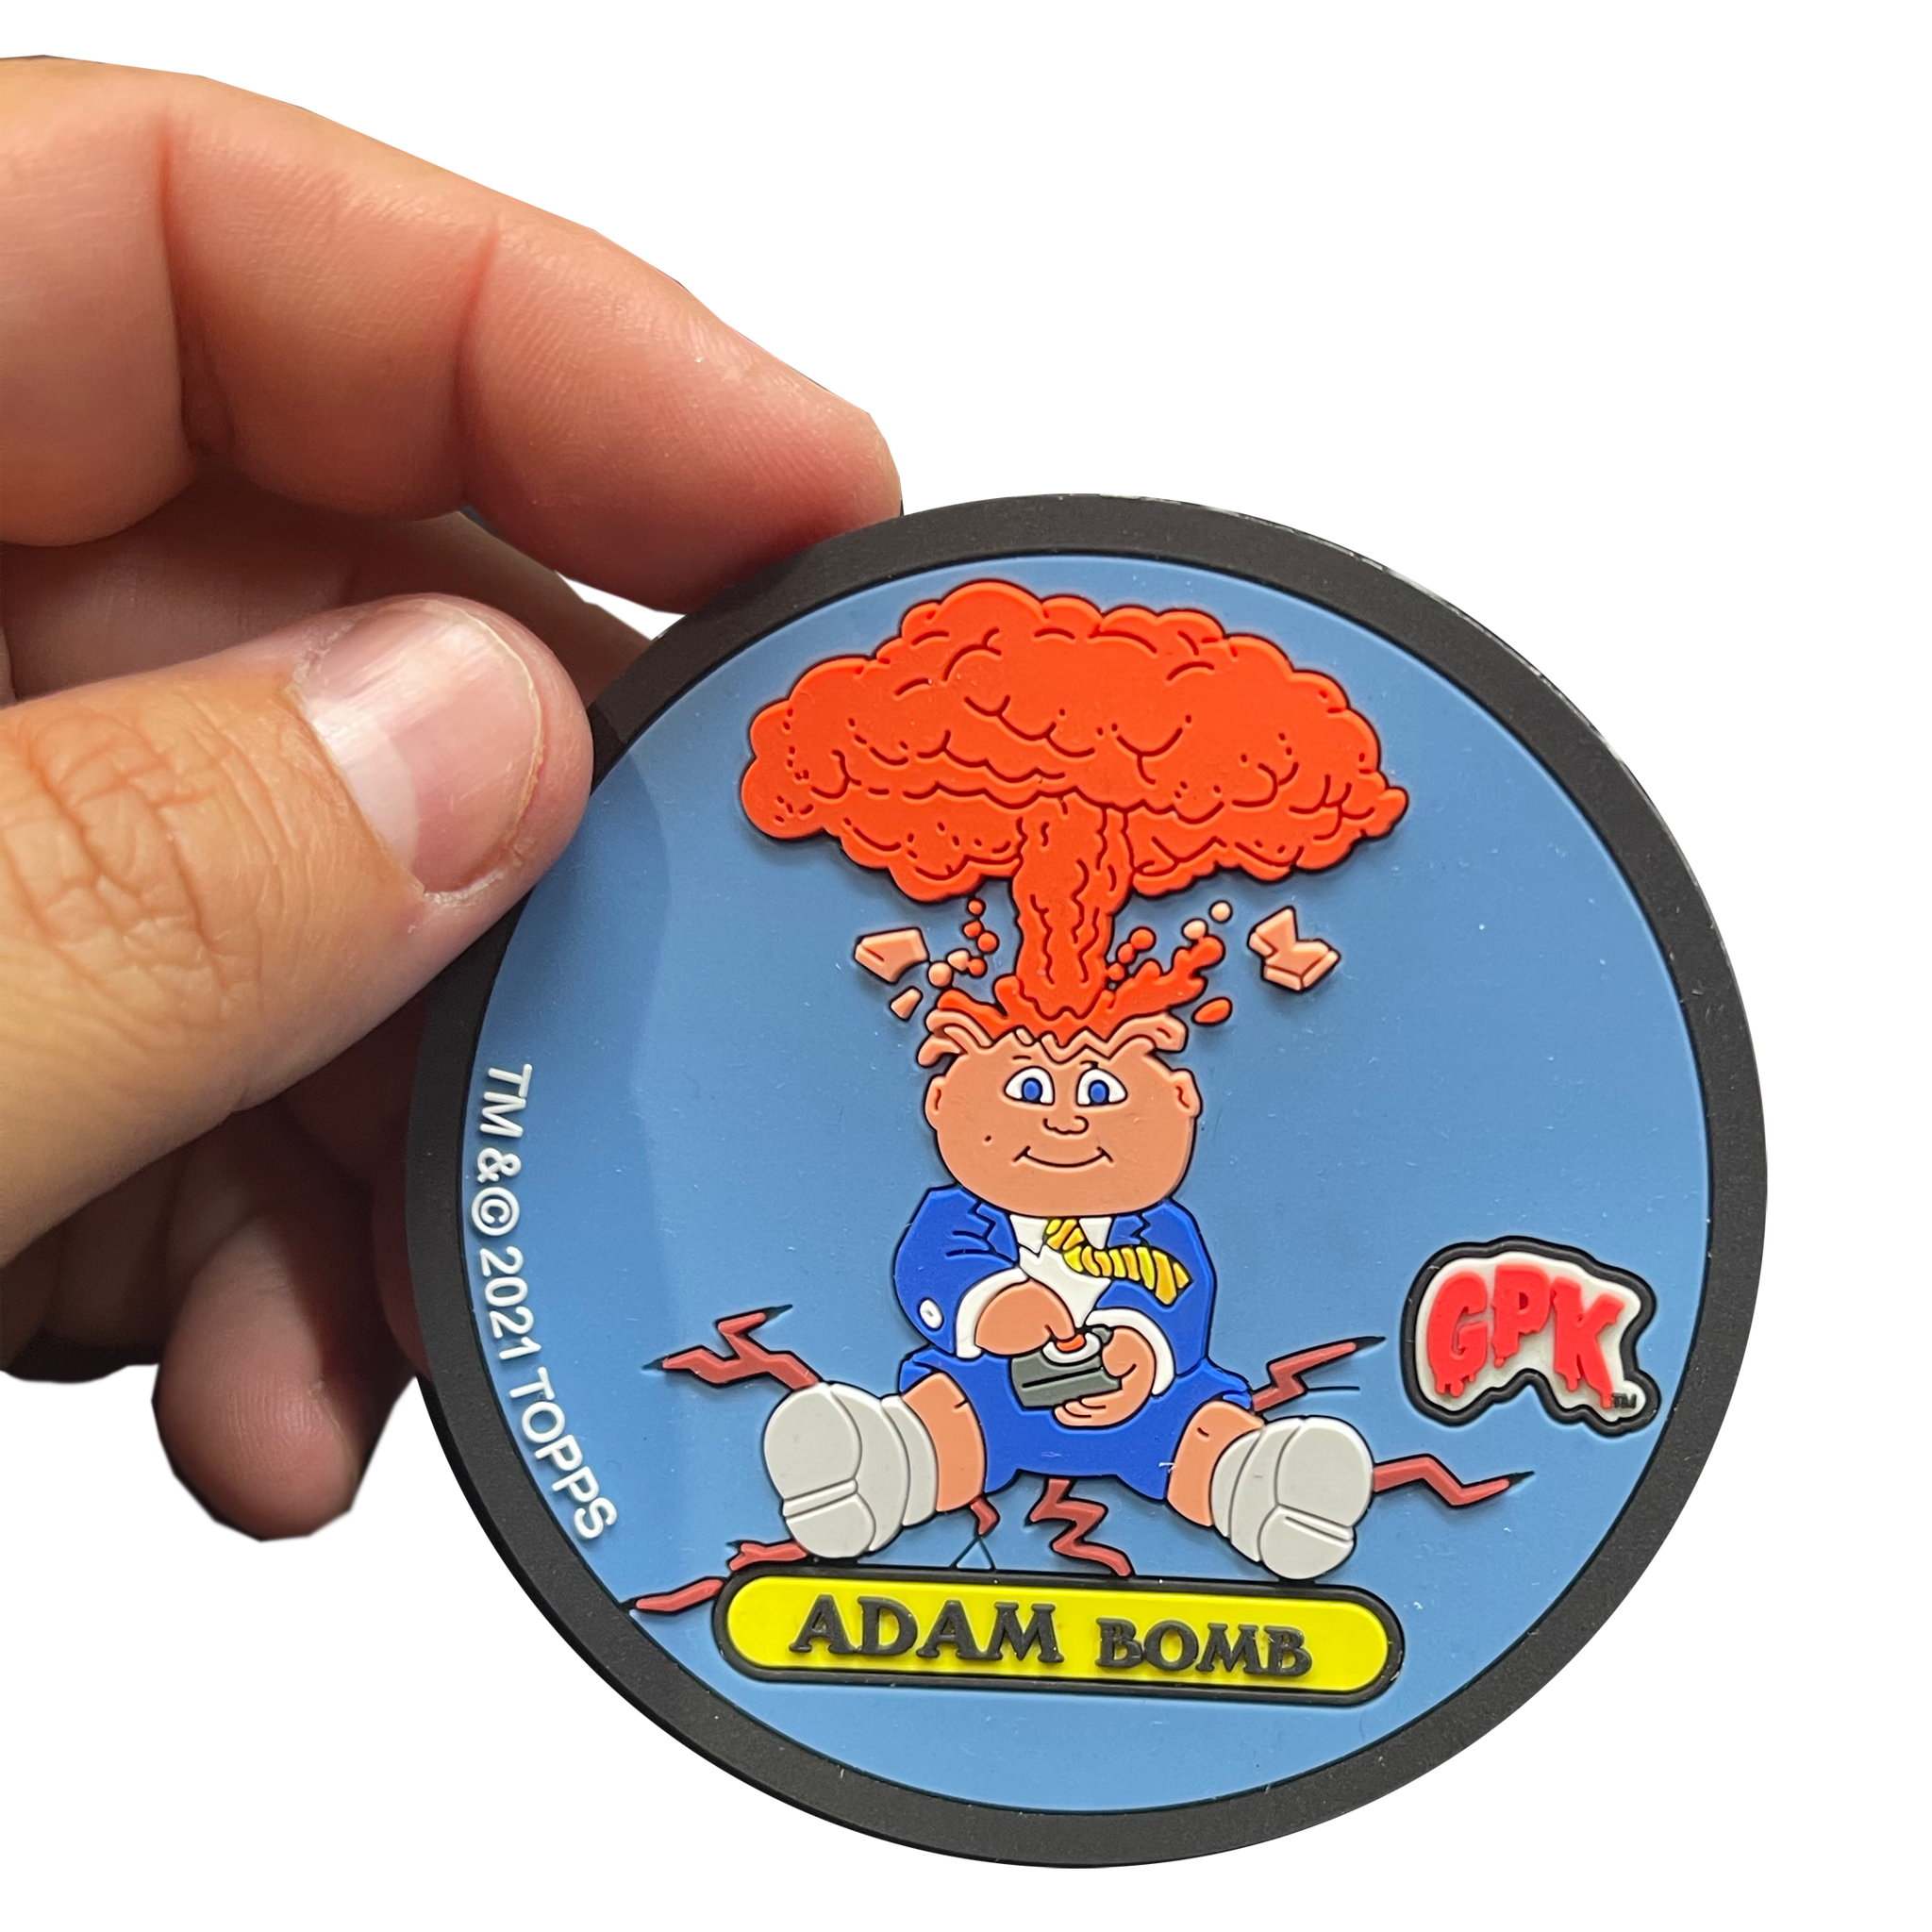 ADAM BOMB Exclusive Topps Officially Licensed "Glowster" GPK Garbage Pail Kids Coaster